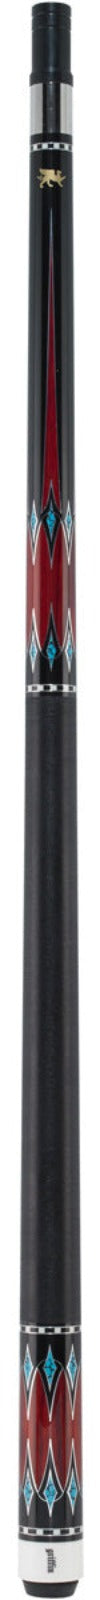 Griffin GR43 Pool Cue -Griffin